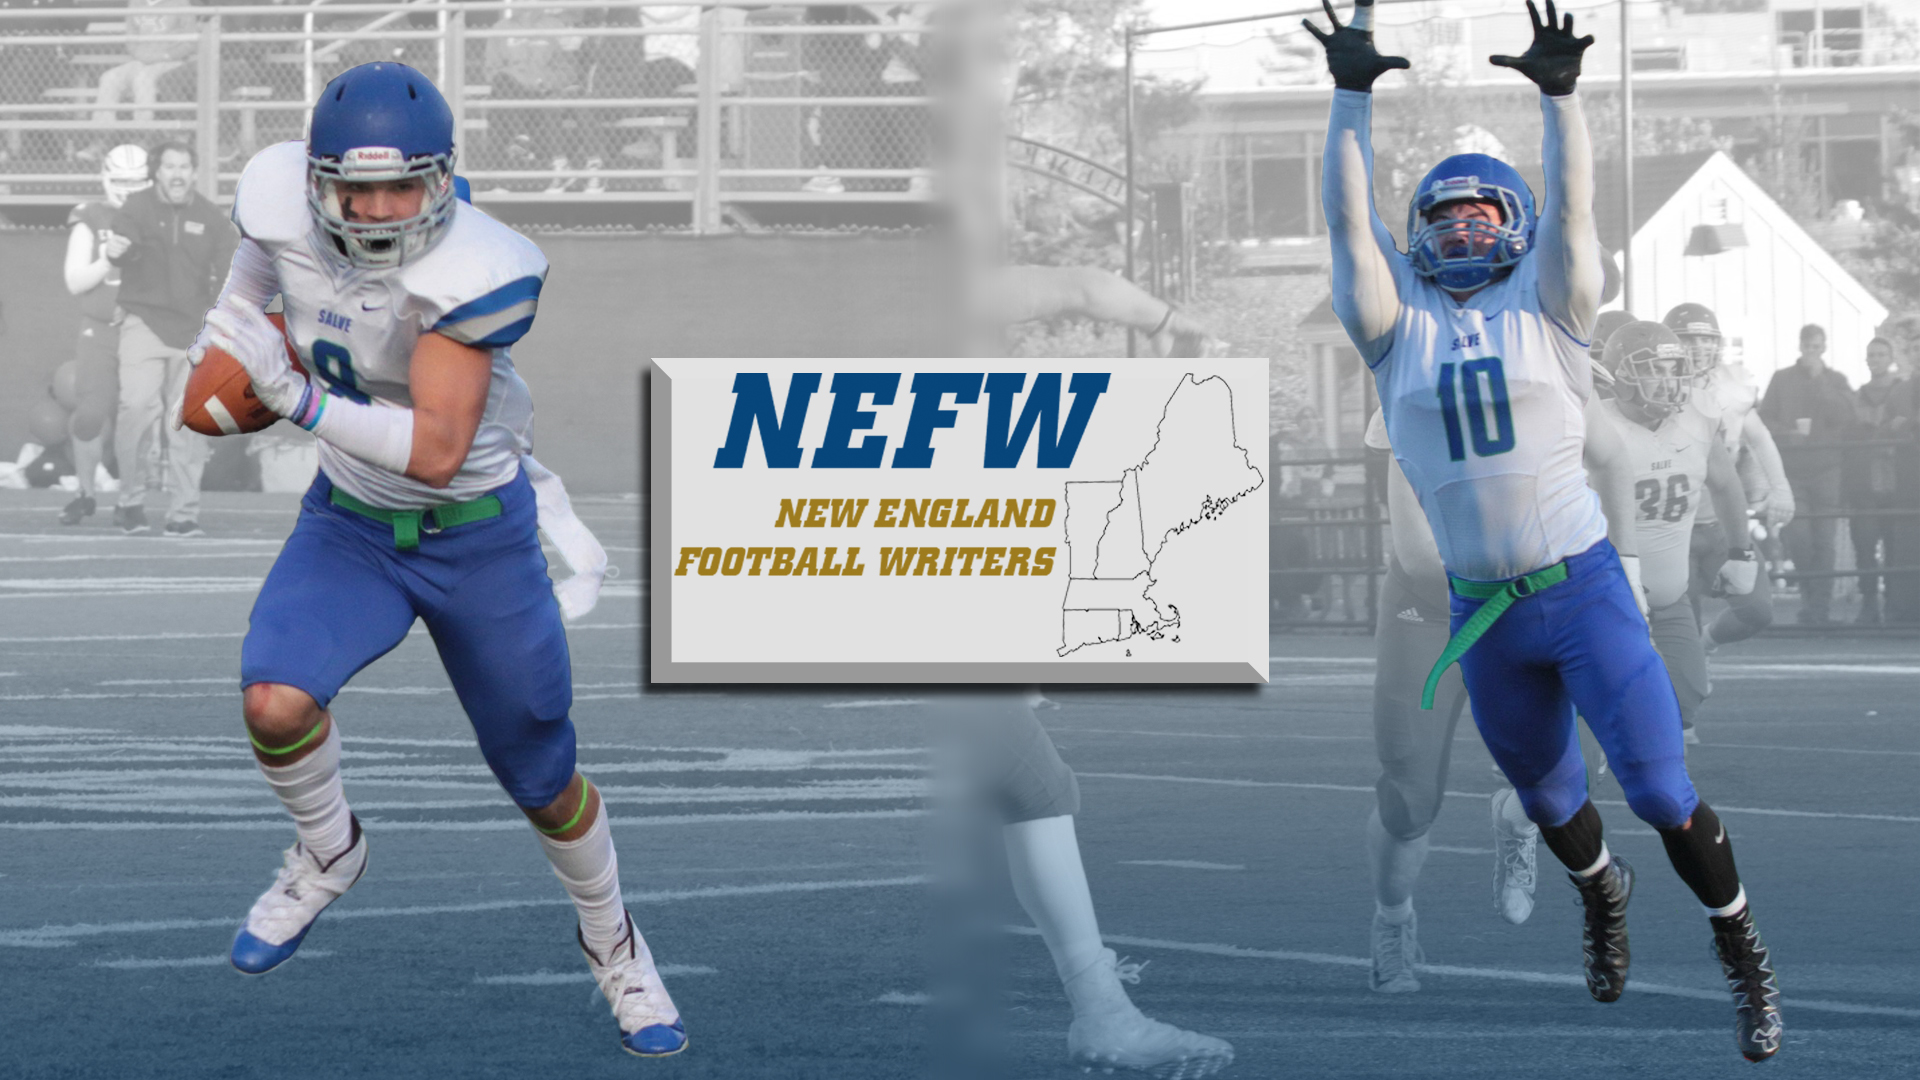 John Salute and Matt Sylvia were named Division III All-Stars by the New England Football Writers (NEFW)